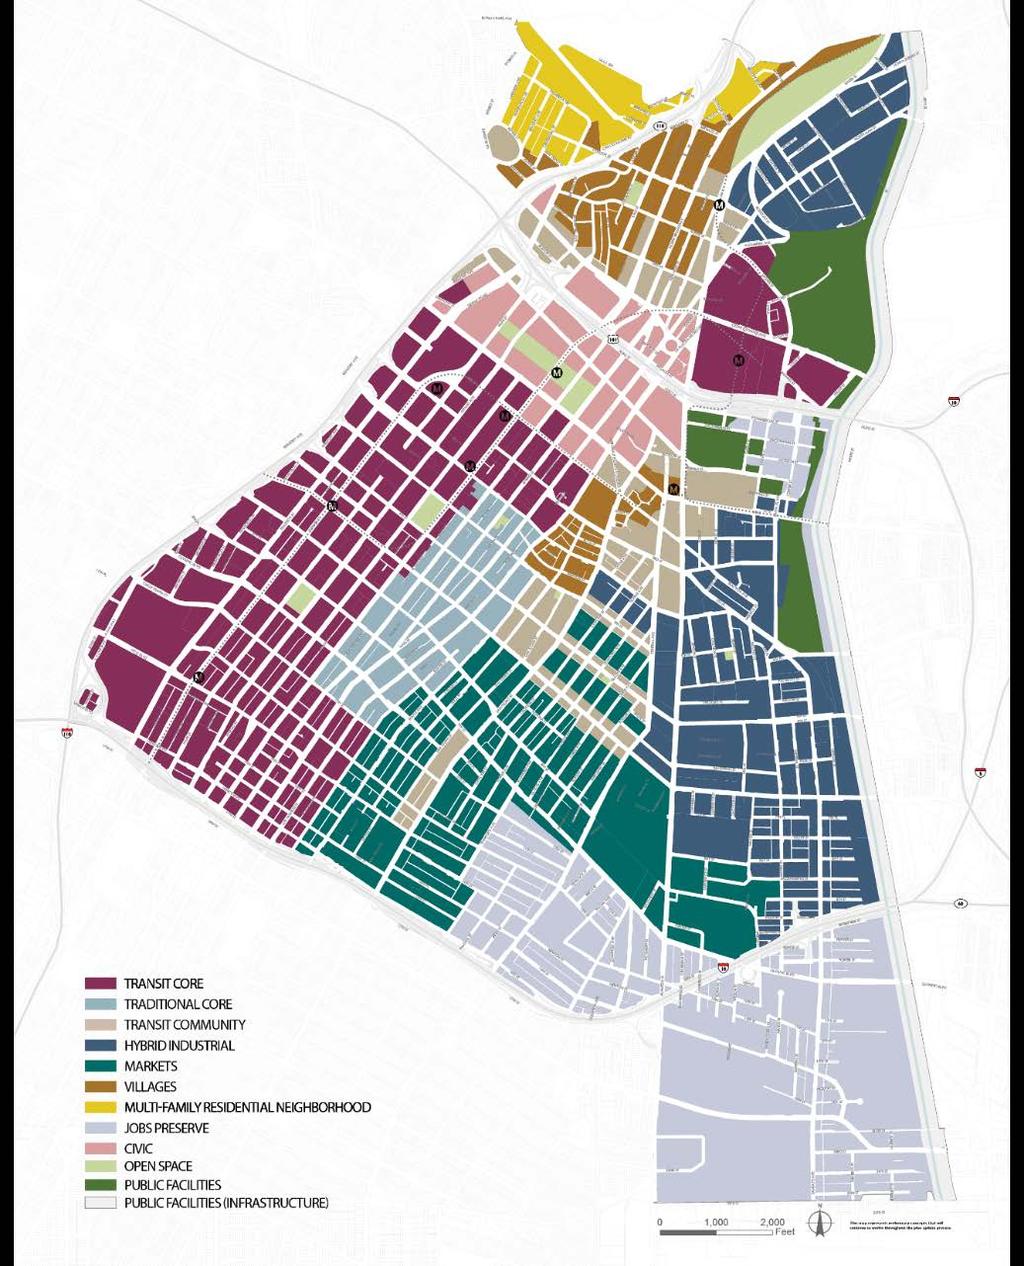 TNP: Regional Connector Downtown Community Plan Update (DTLA 2040) Creates zones and update policies to support transit orientation Distinguishes types of places based on access to transit and